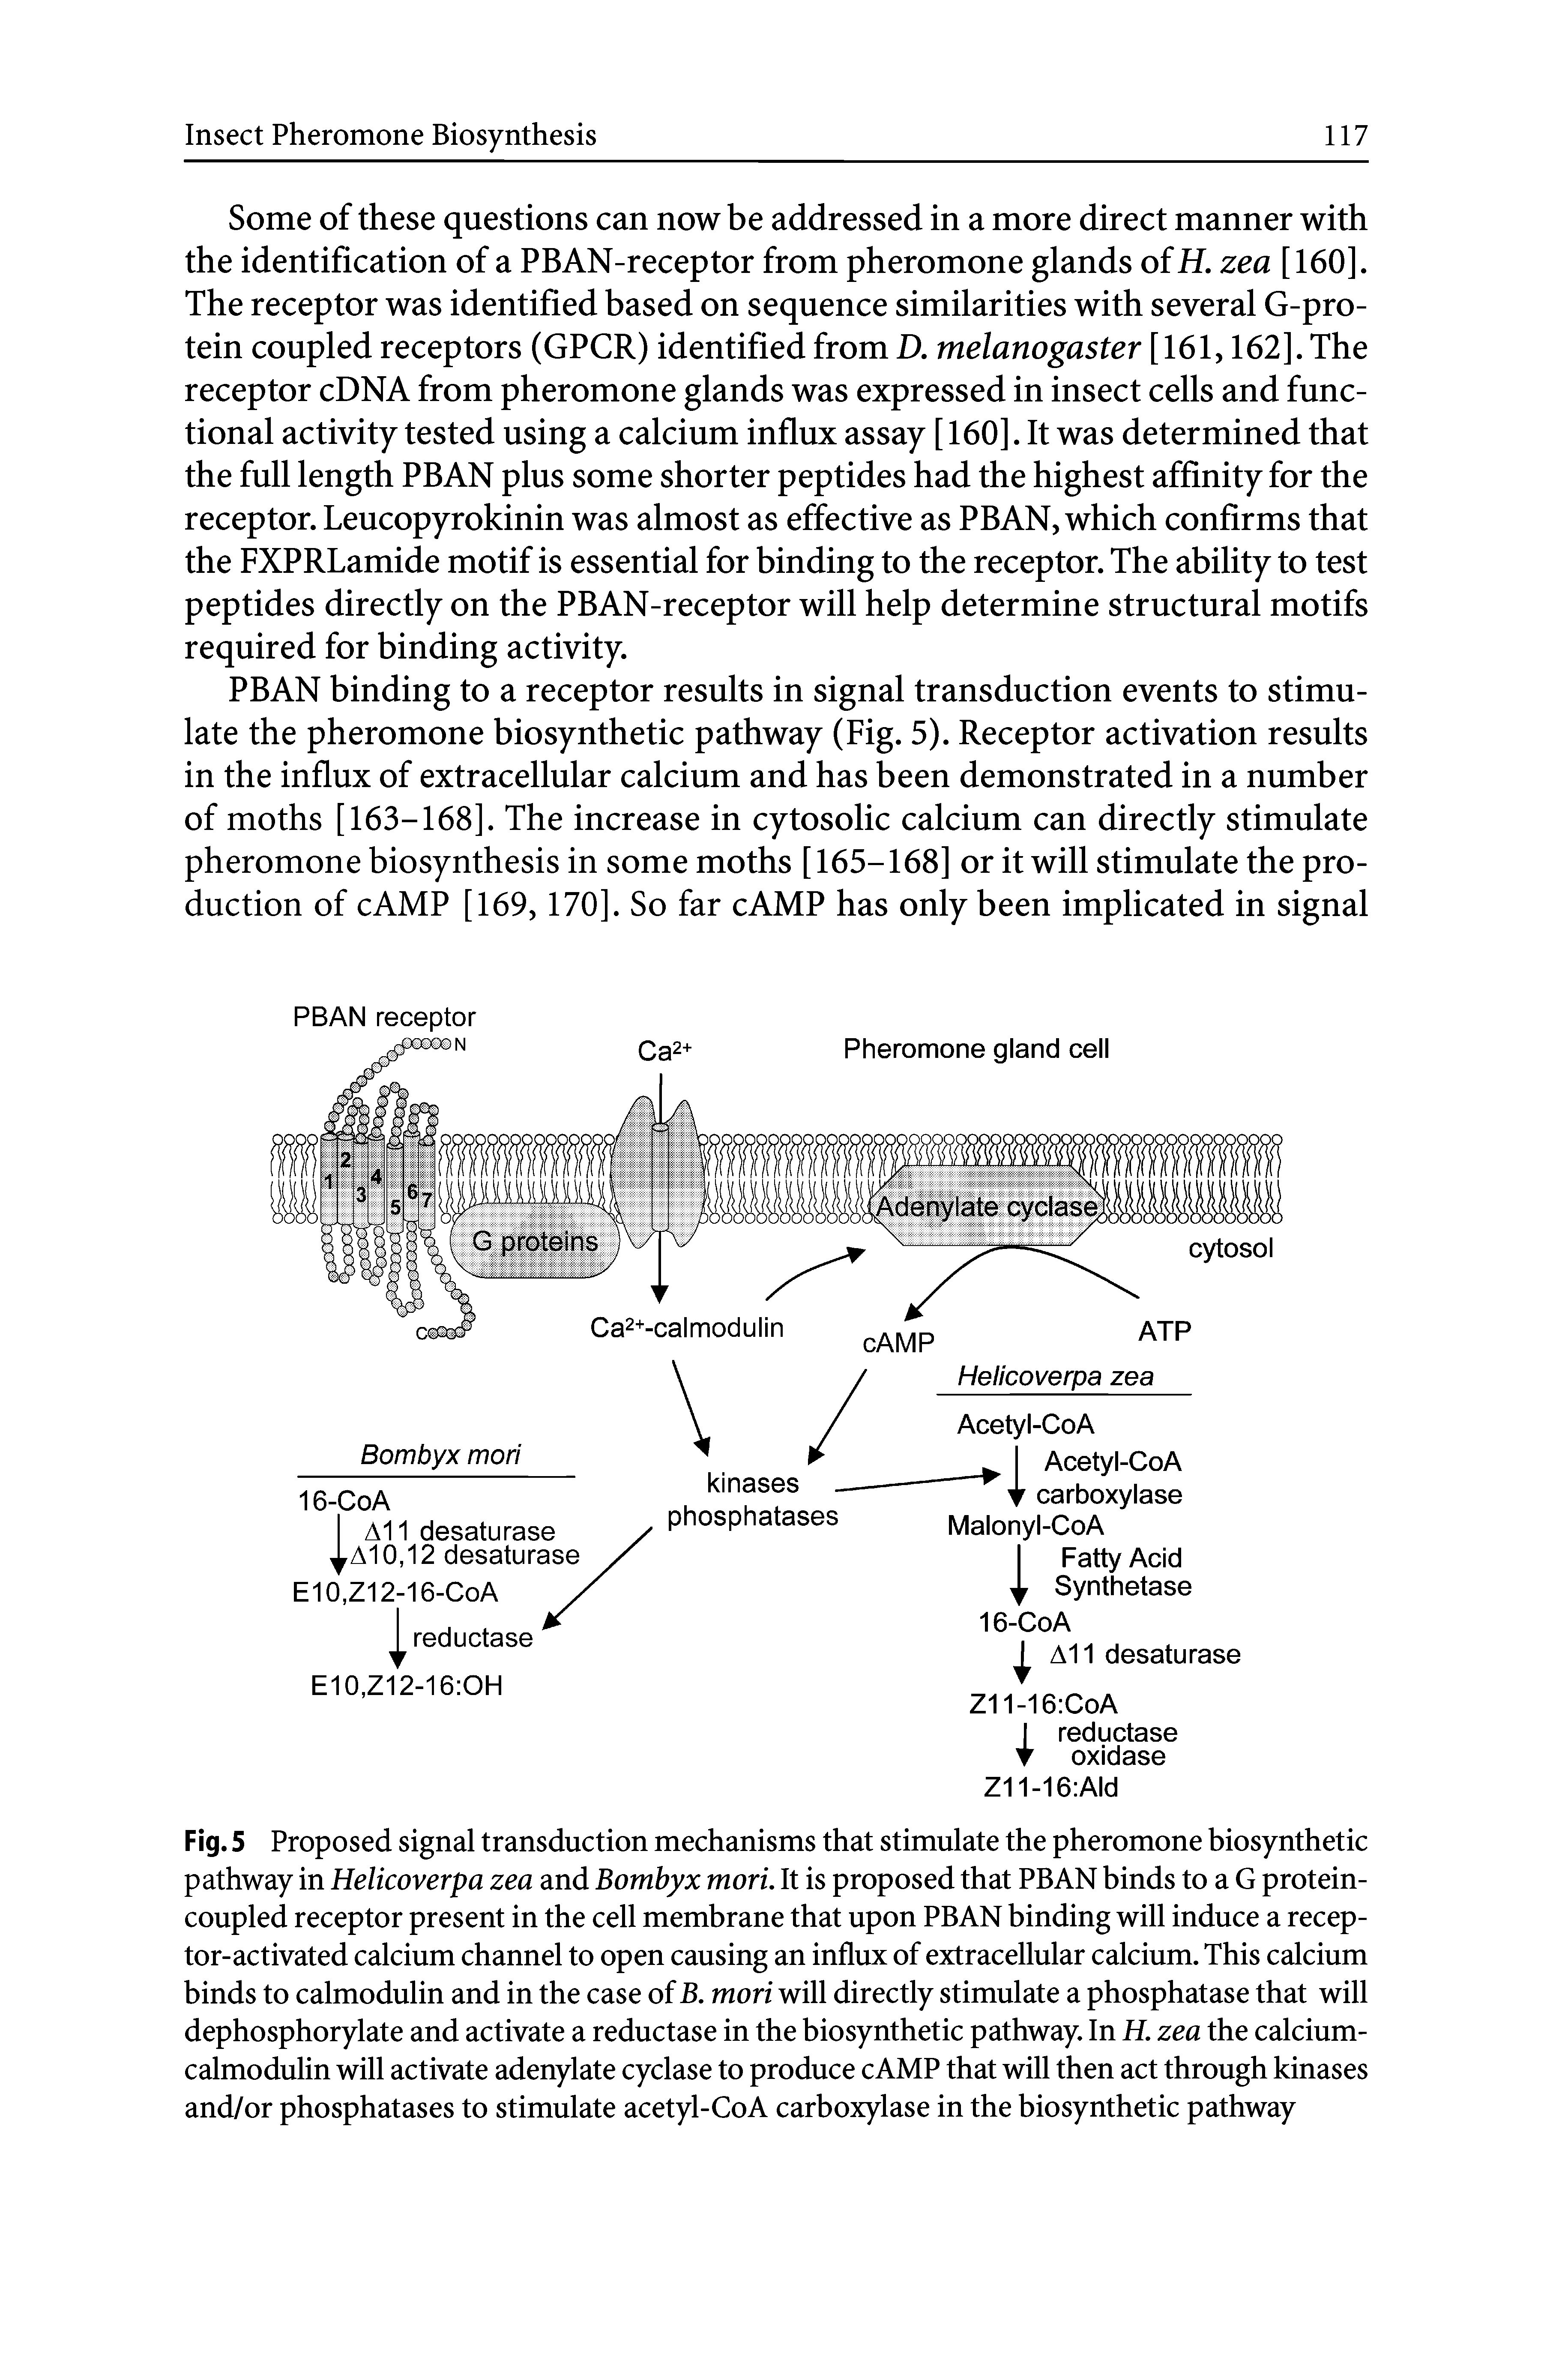 Fig. 5 Proposed signal transduction mechanisms that stimulate the pheromone biosynthetic pathway in Helicoverpa zea and Bombyx mori. It is proposed that PBAN binds to a G protein-coupled receptor present in the cell membrane that upon PBAN binding will induce a receptor-activated calcium channel to open causing an influx of extracellular calcium. This calcium binds to calmodulin and in the case of B. mori will directly stimulate a phosphatase that will dephosphorylate and activate a reductase in the biosynthetic pathway. In H. zea the calcium-calmodulin will activate adenylate cyclase to produce cAMP that will then act through kinases and/or phosphatases to stimulate acetyl-CoA carboxylase in the biosynthetic pathway...